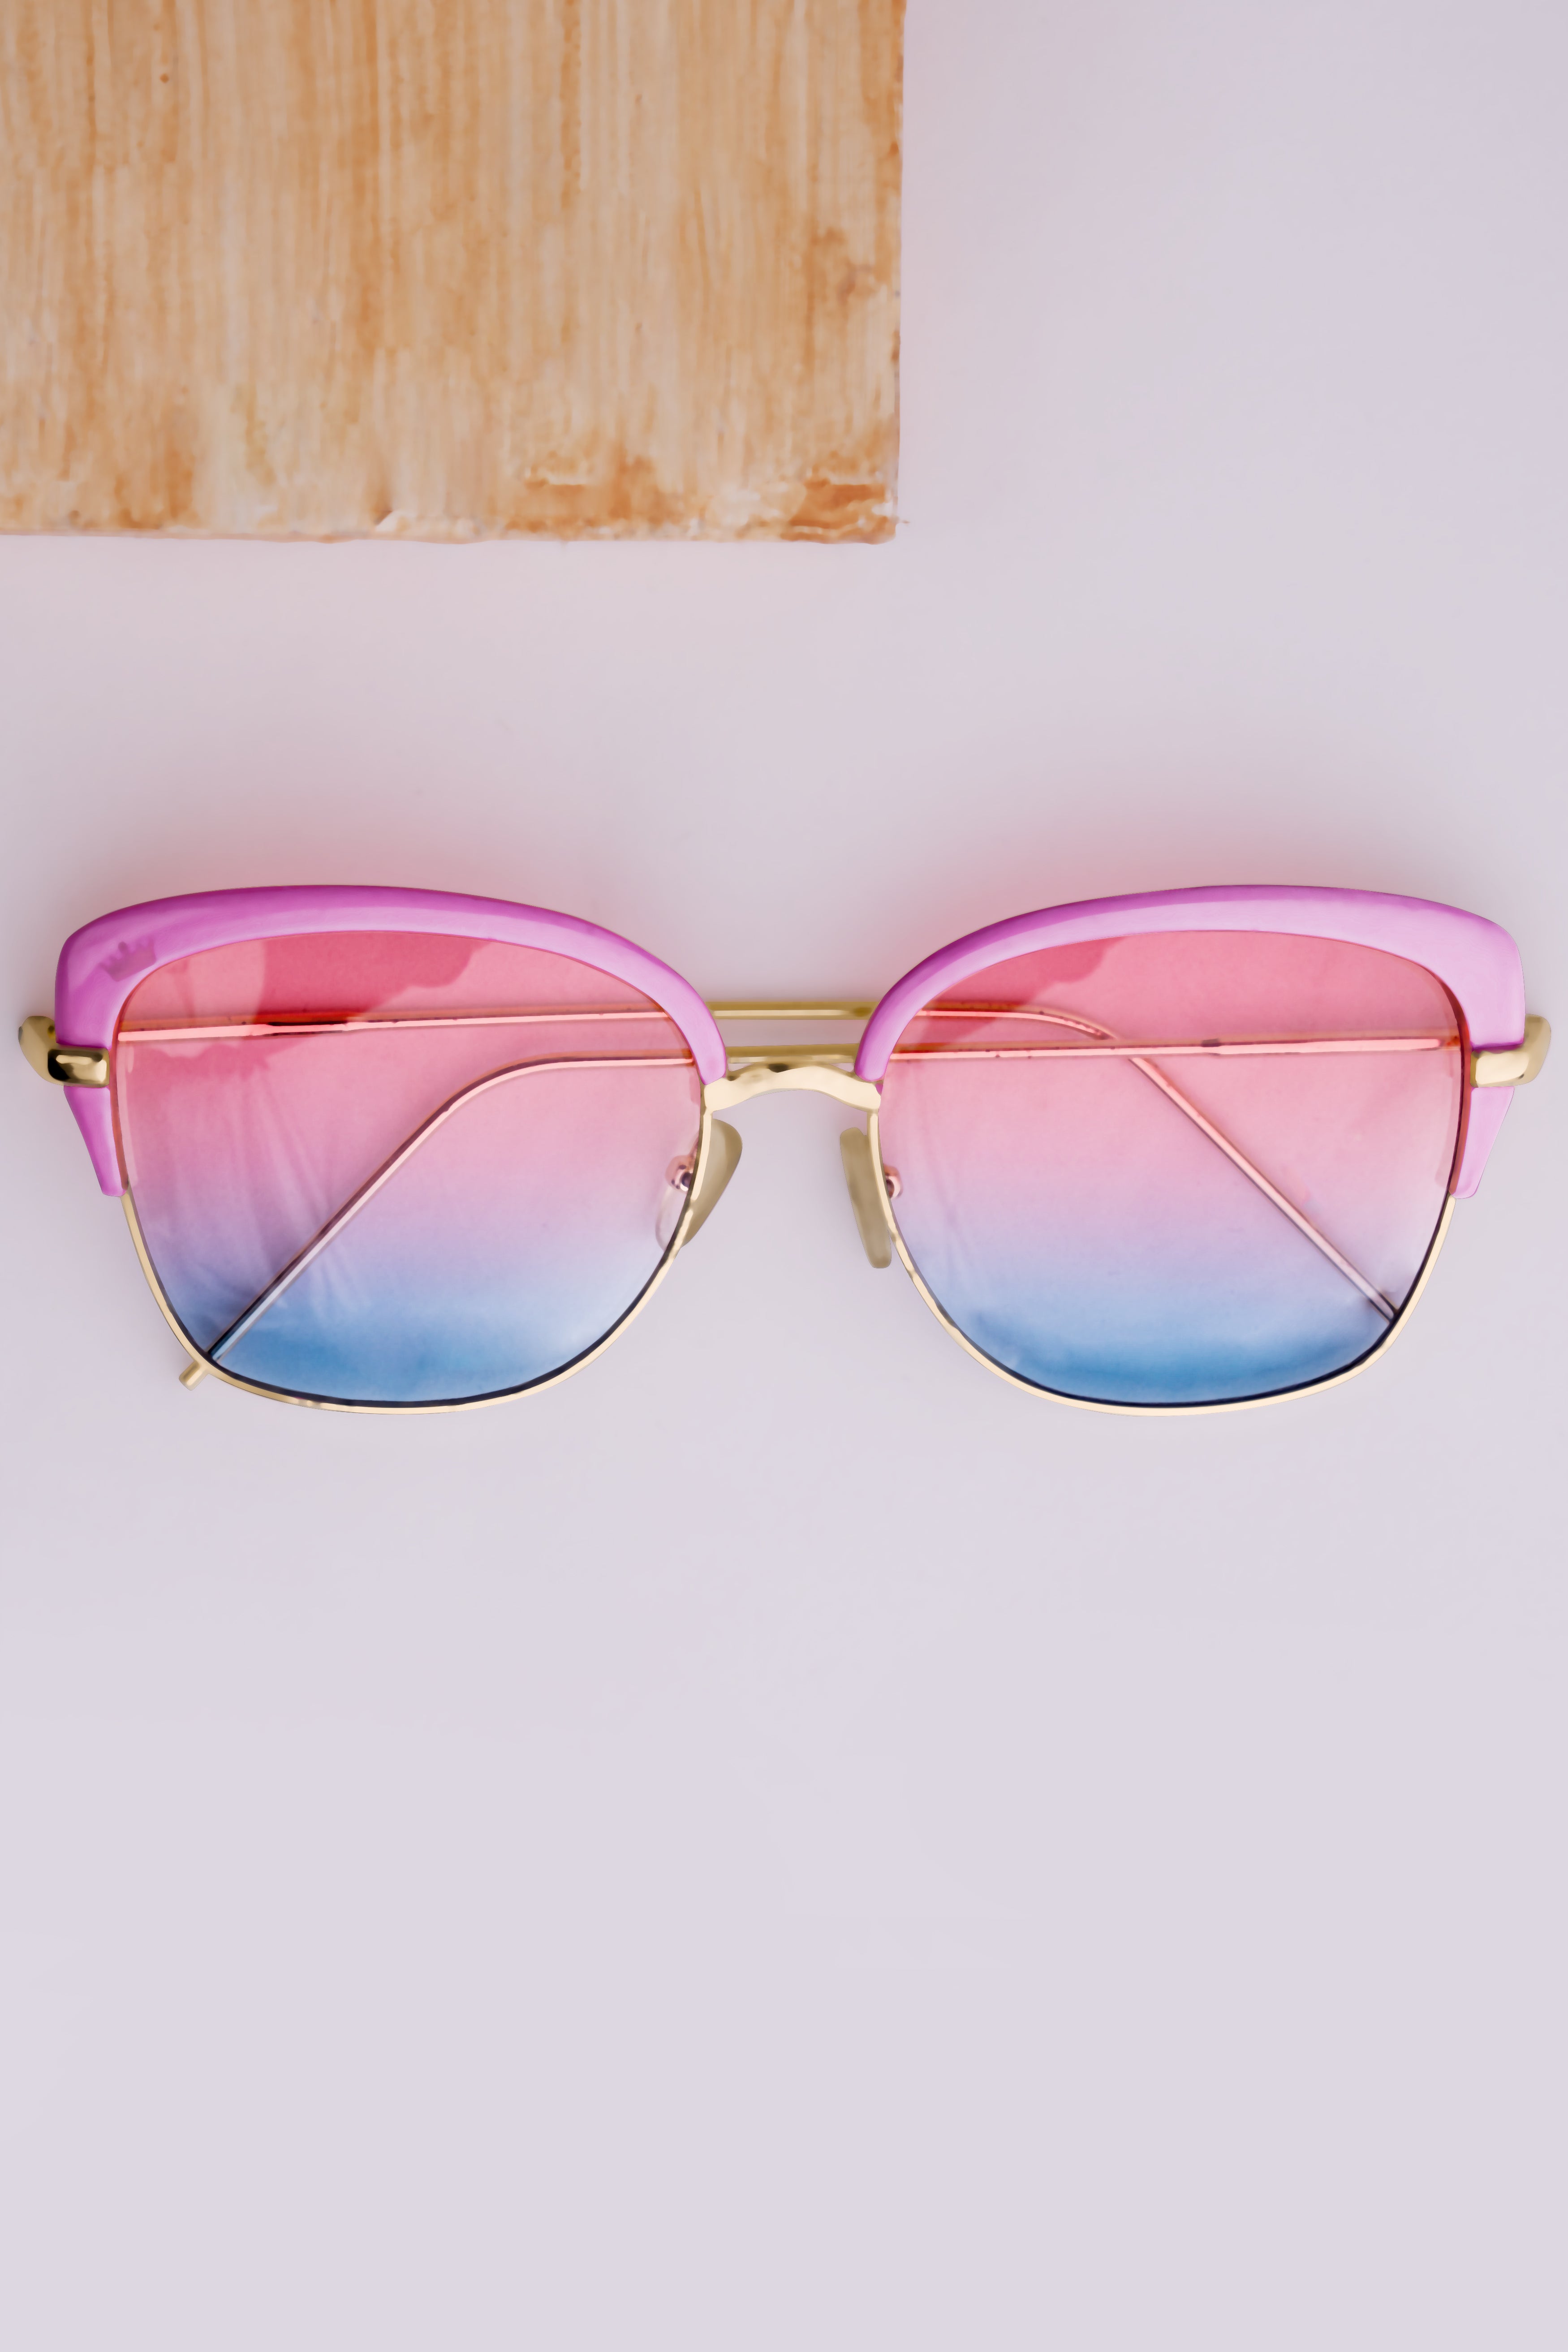 Shop 100% Speedcraft SL Matte Washed Out Neon Pink Sunglasses with Smoke  Lens — LafoBikes